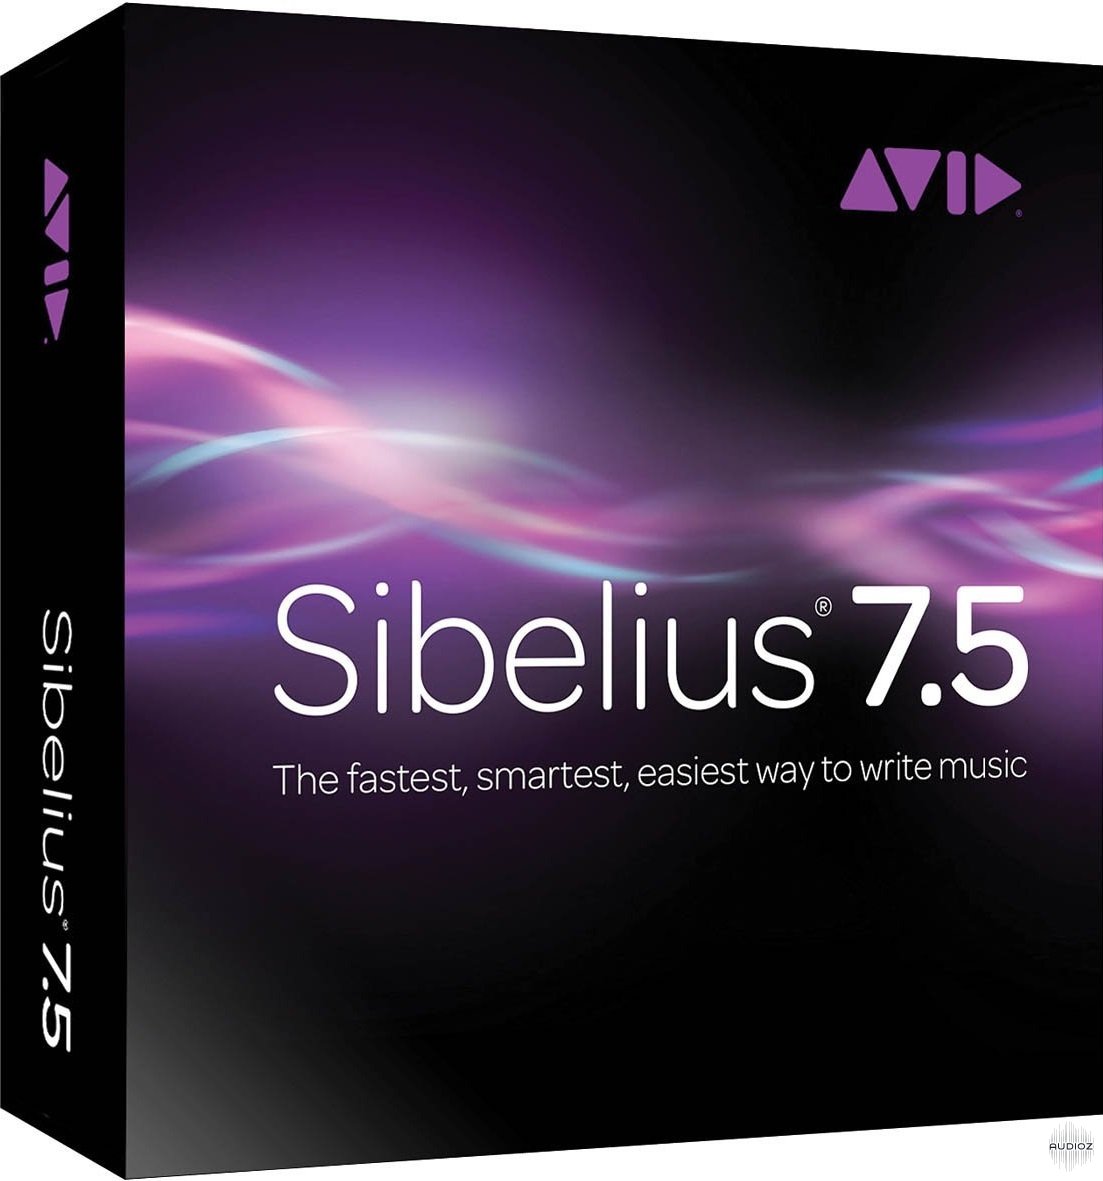 sibelius 7.5 sounds library download